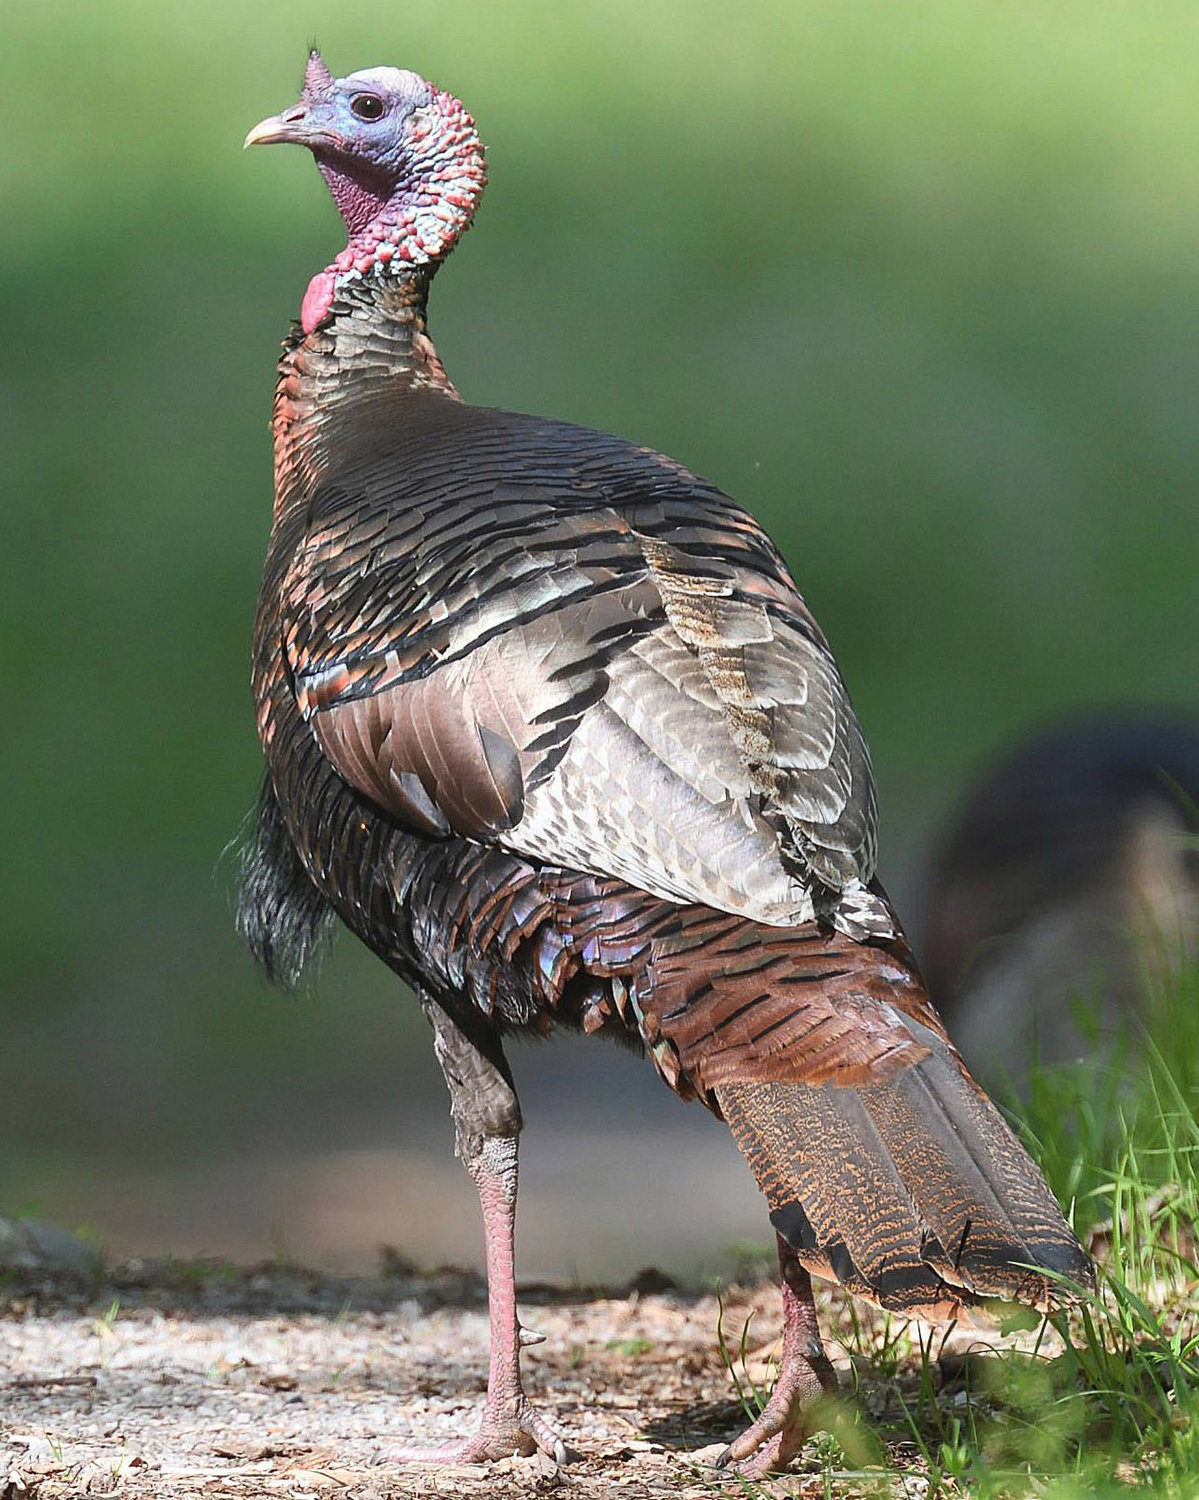 This tom (male) turkey makes a striking sight in the sunlight. It has the red head, the beard hanging off the breast, and the spurs about two inches higher than its feet on the tarsus, which all indicate a male. In the male young of one year old or so (jakes), it may be more difficult to determine sex. Their spurs are small and their beards are short. Turkeys have keen eyesight, so they are hard to get close to. Binoculars help in seeing a bird’s features.